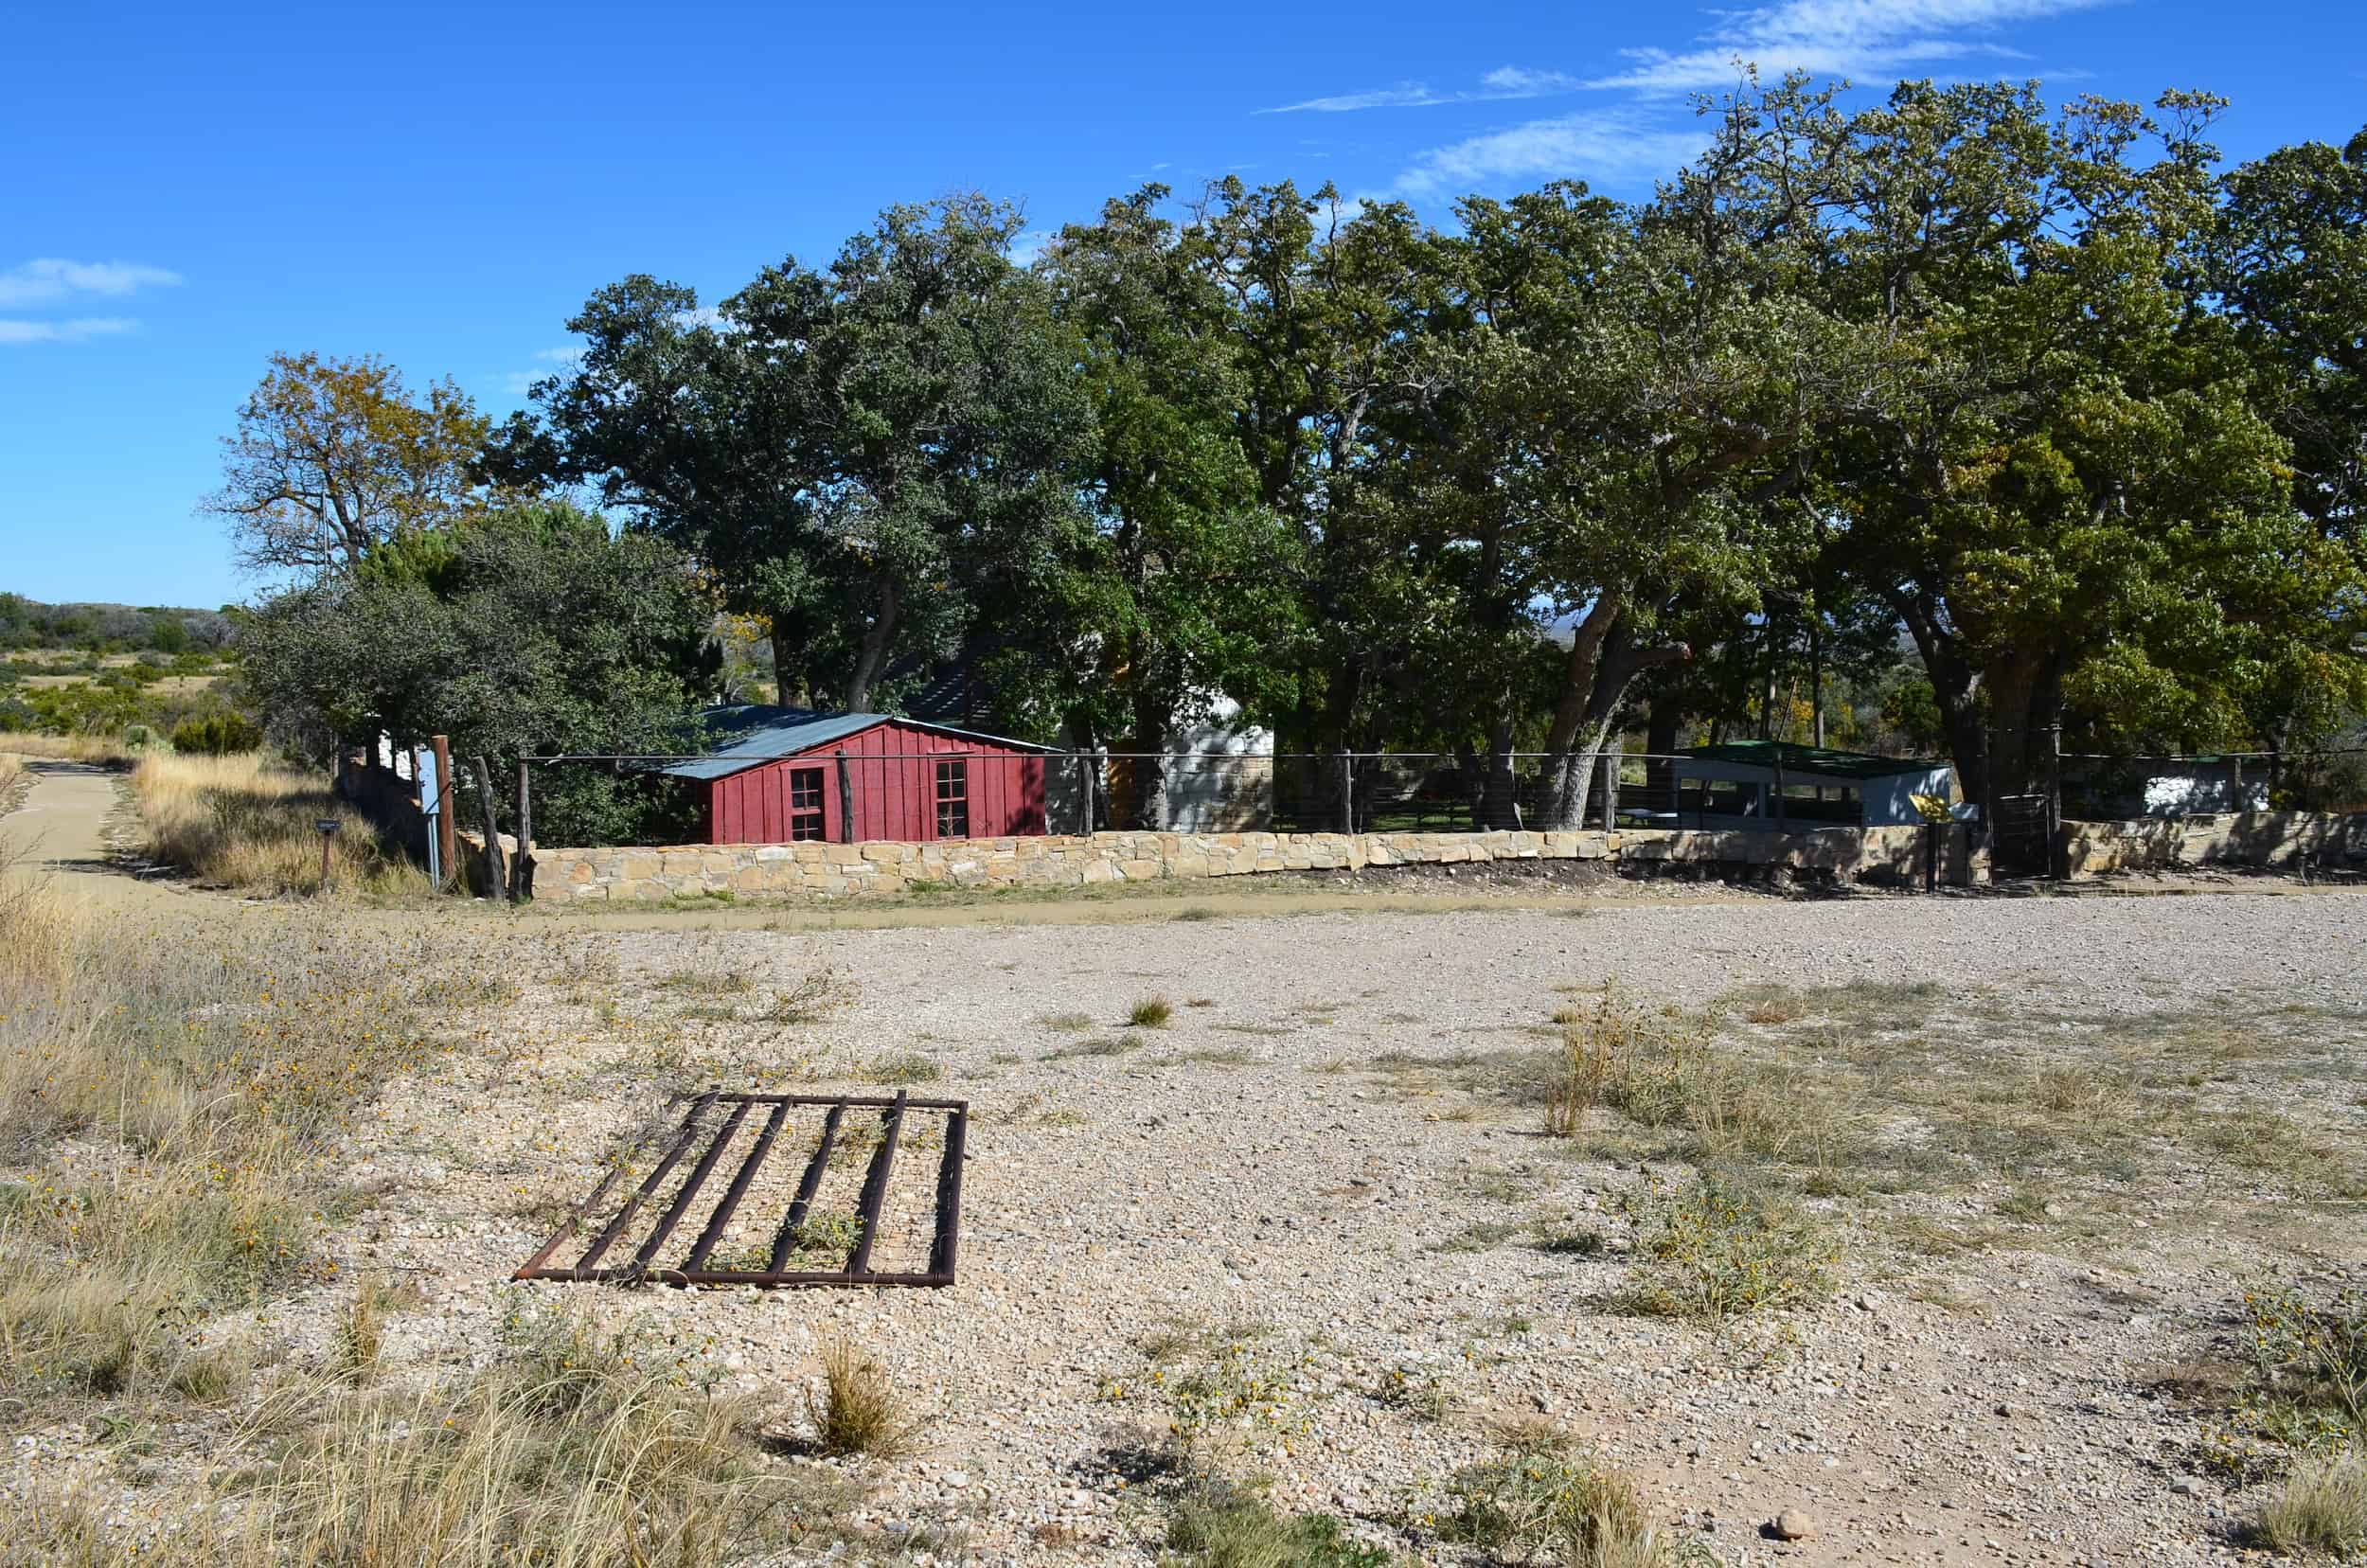 Frijole Ranch at Guadalupe Mountains National Park in Texas